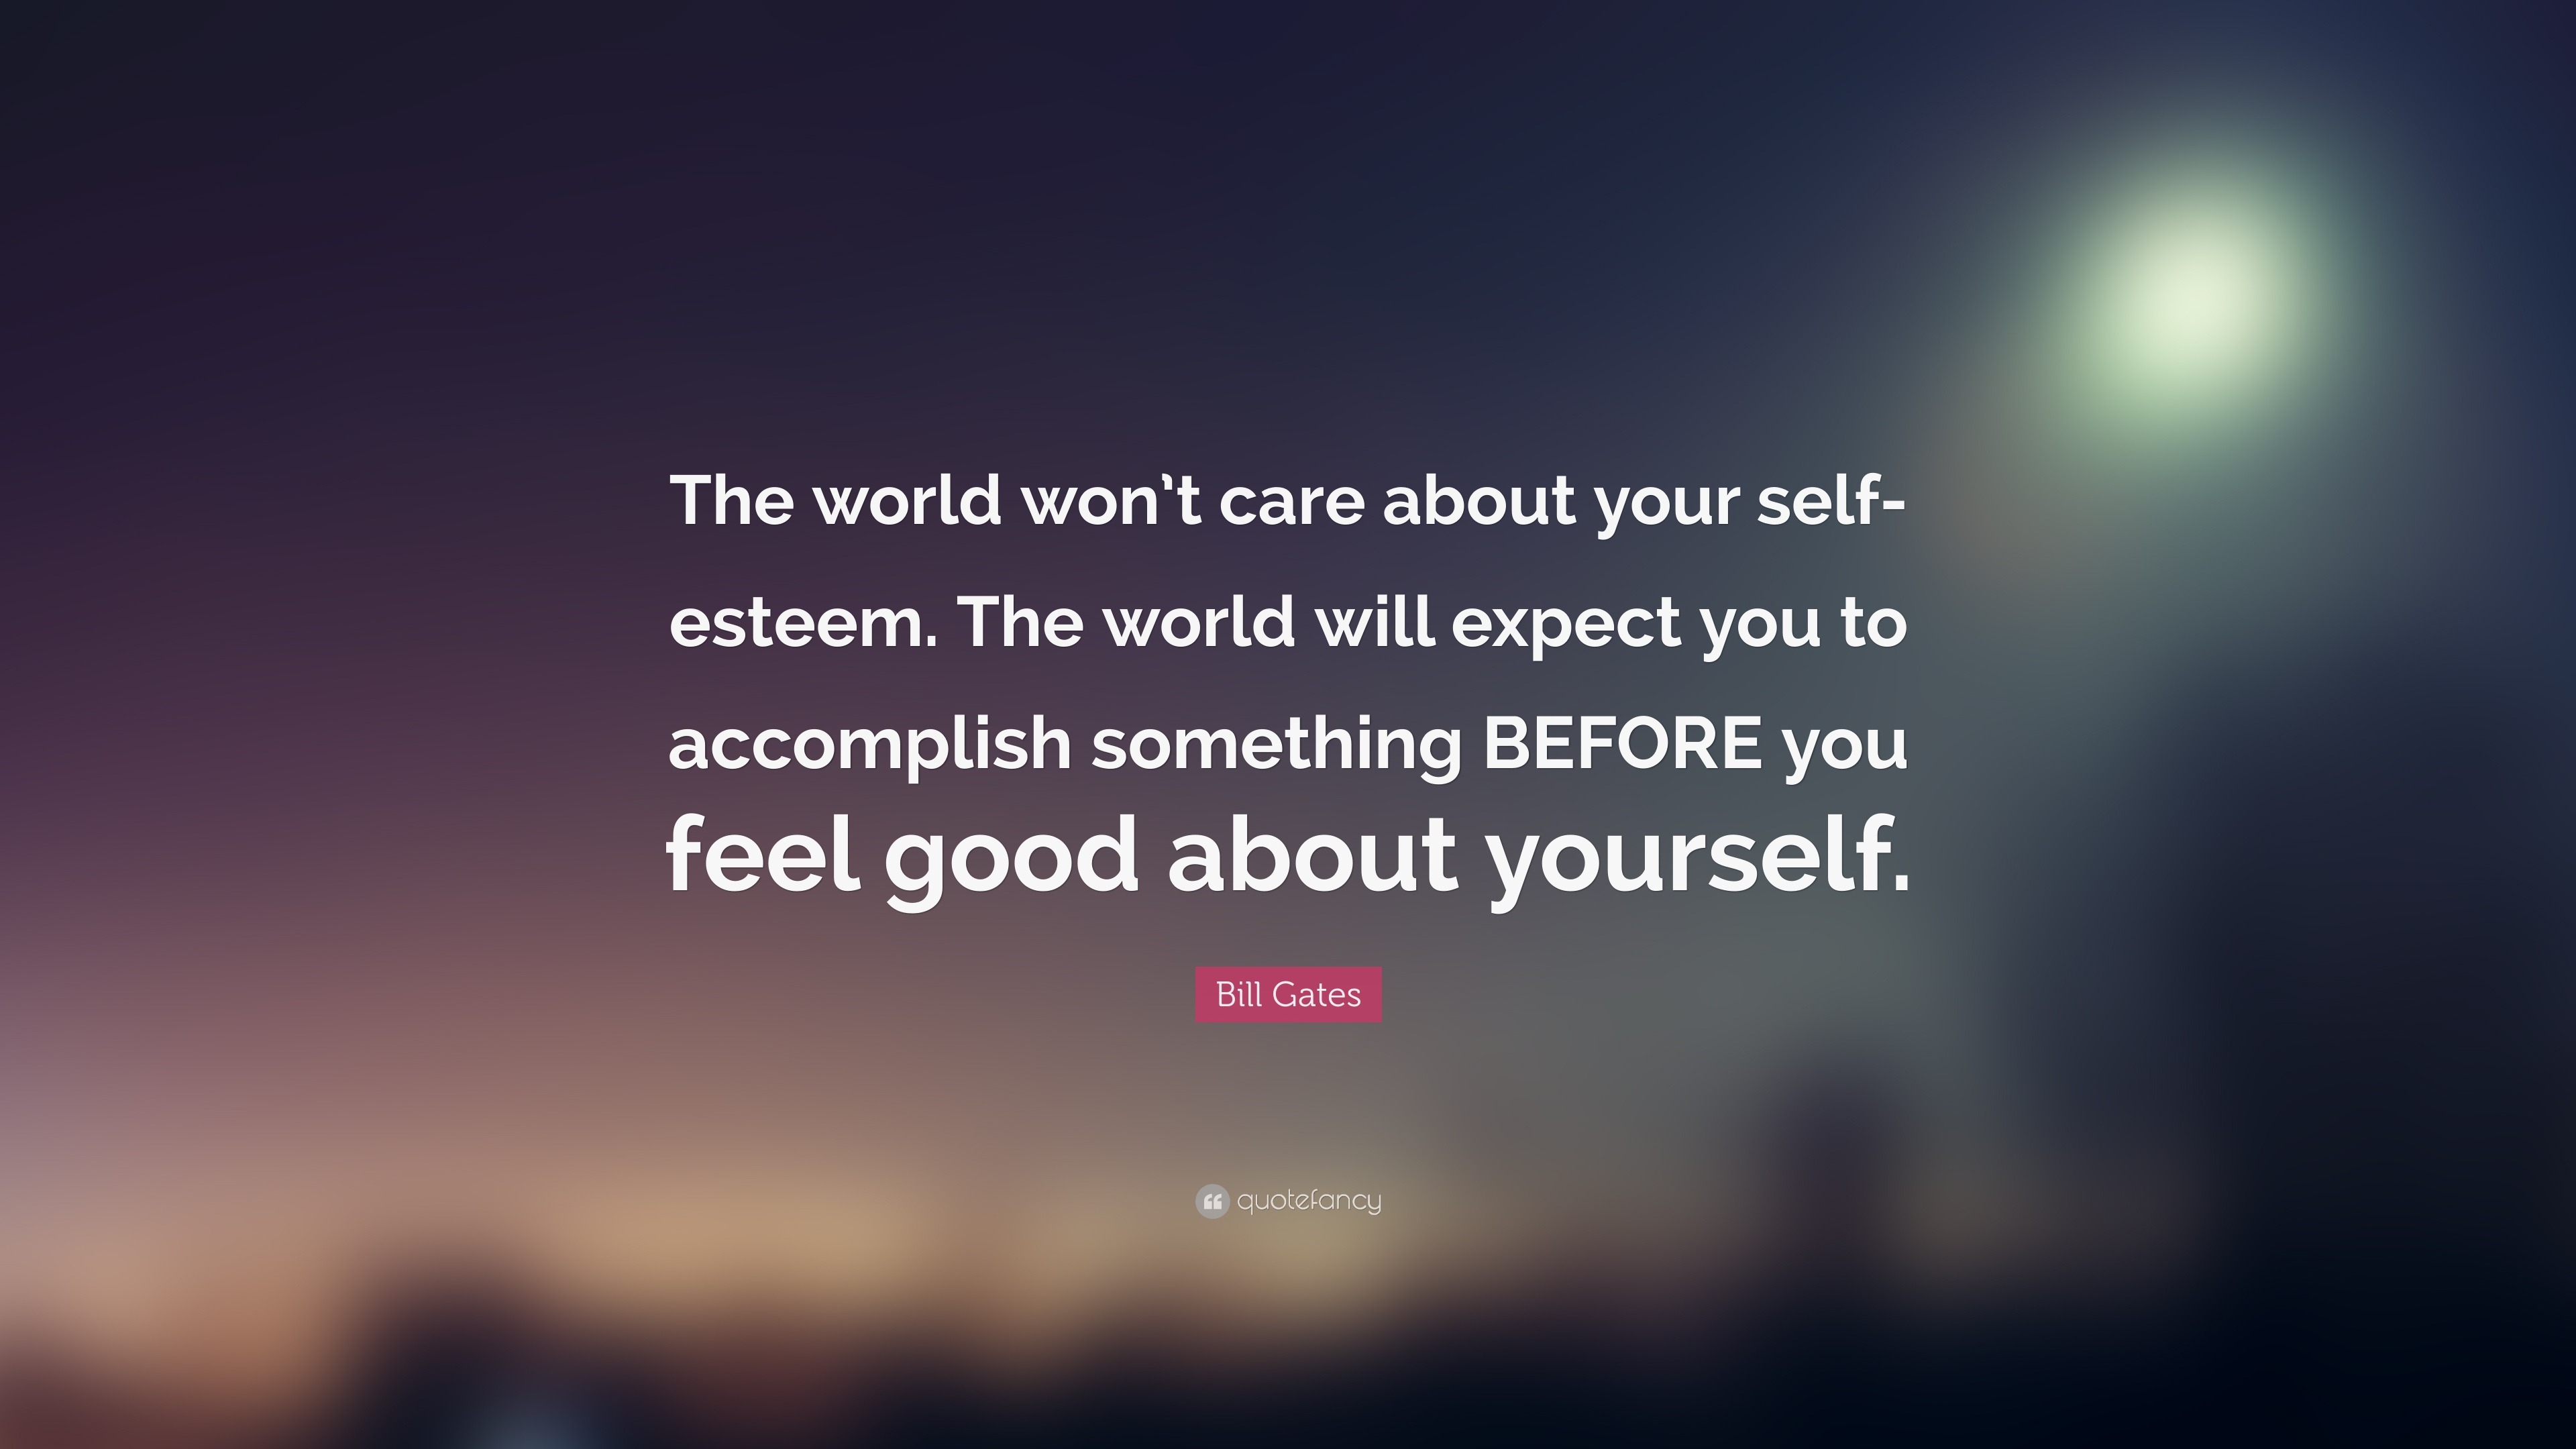 Bill Gates Quote: “The world won’t care about your self-esteem. The ...